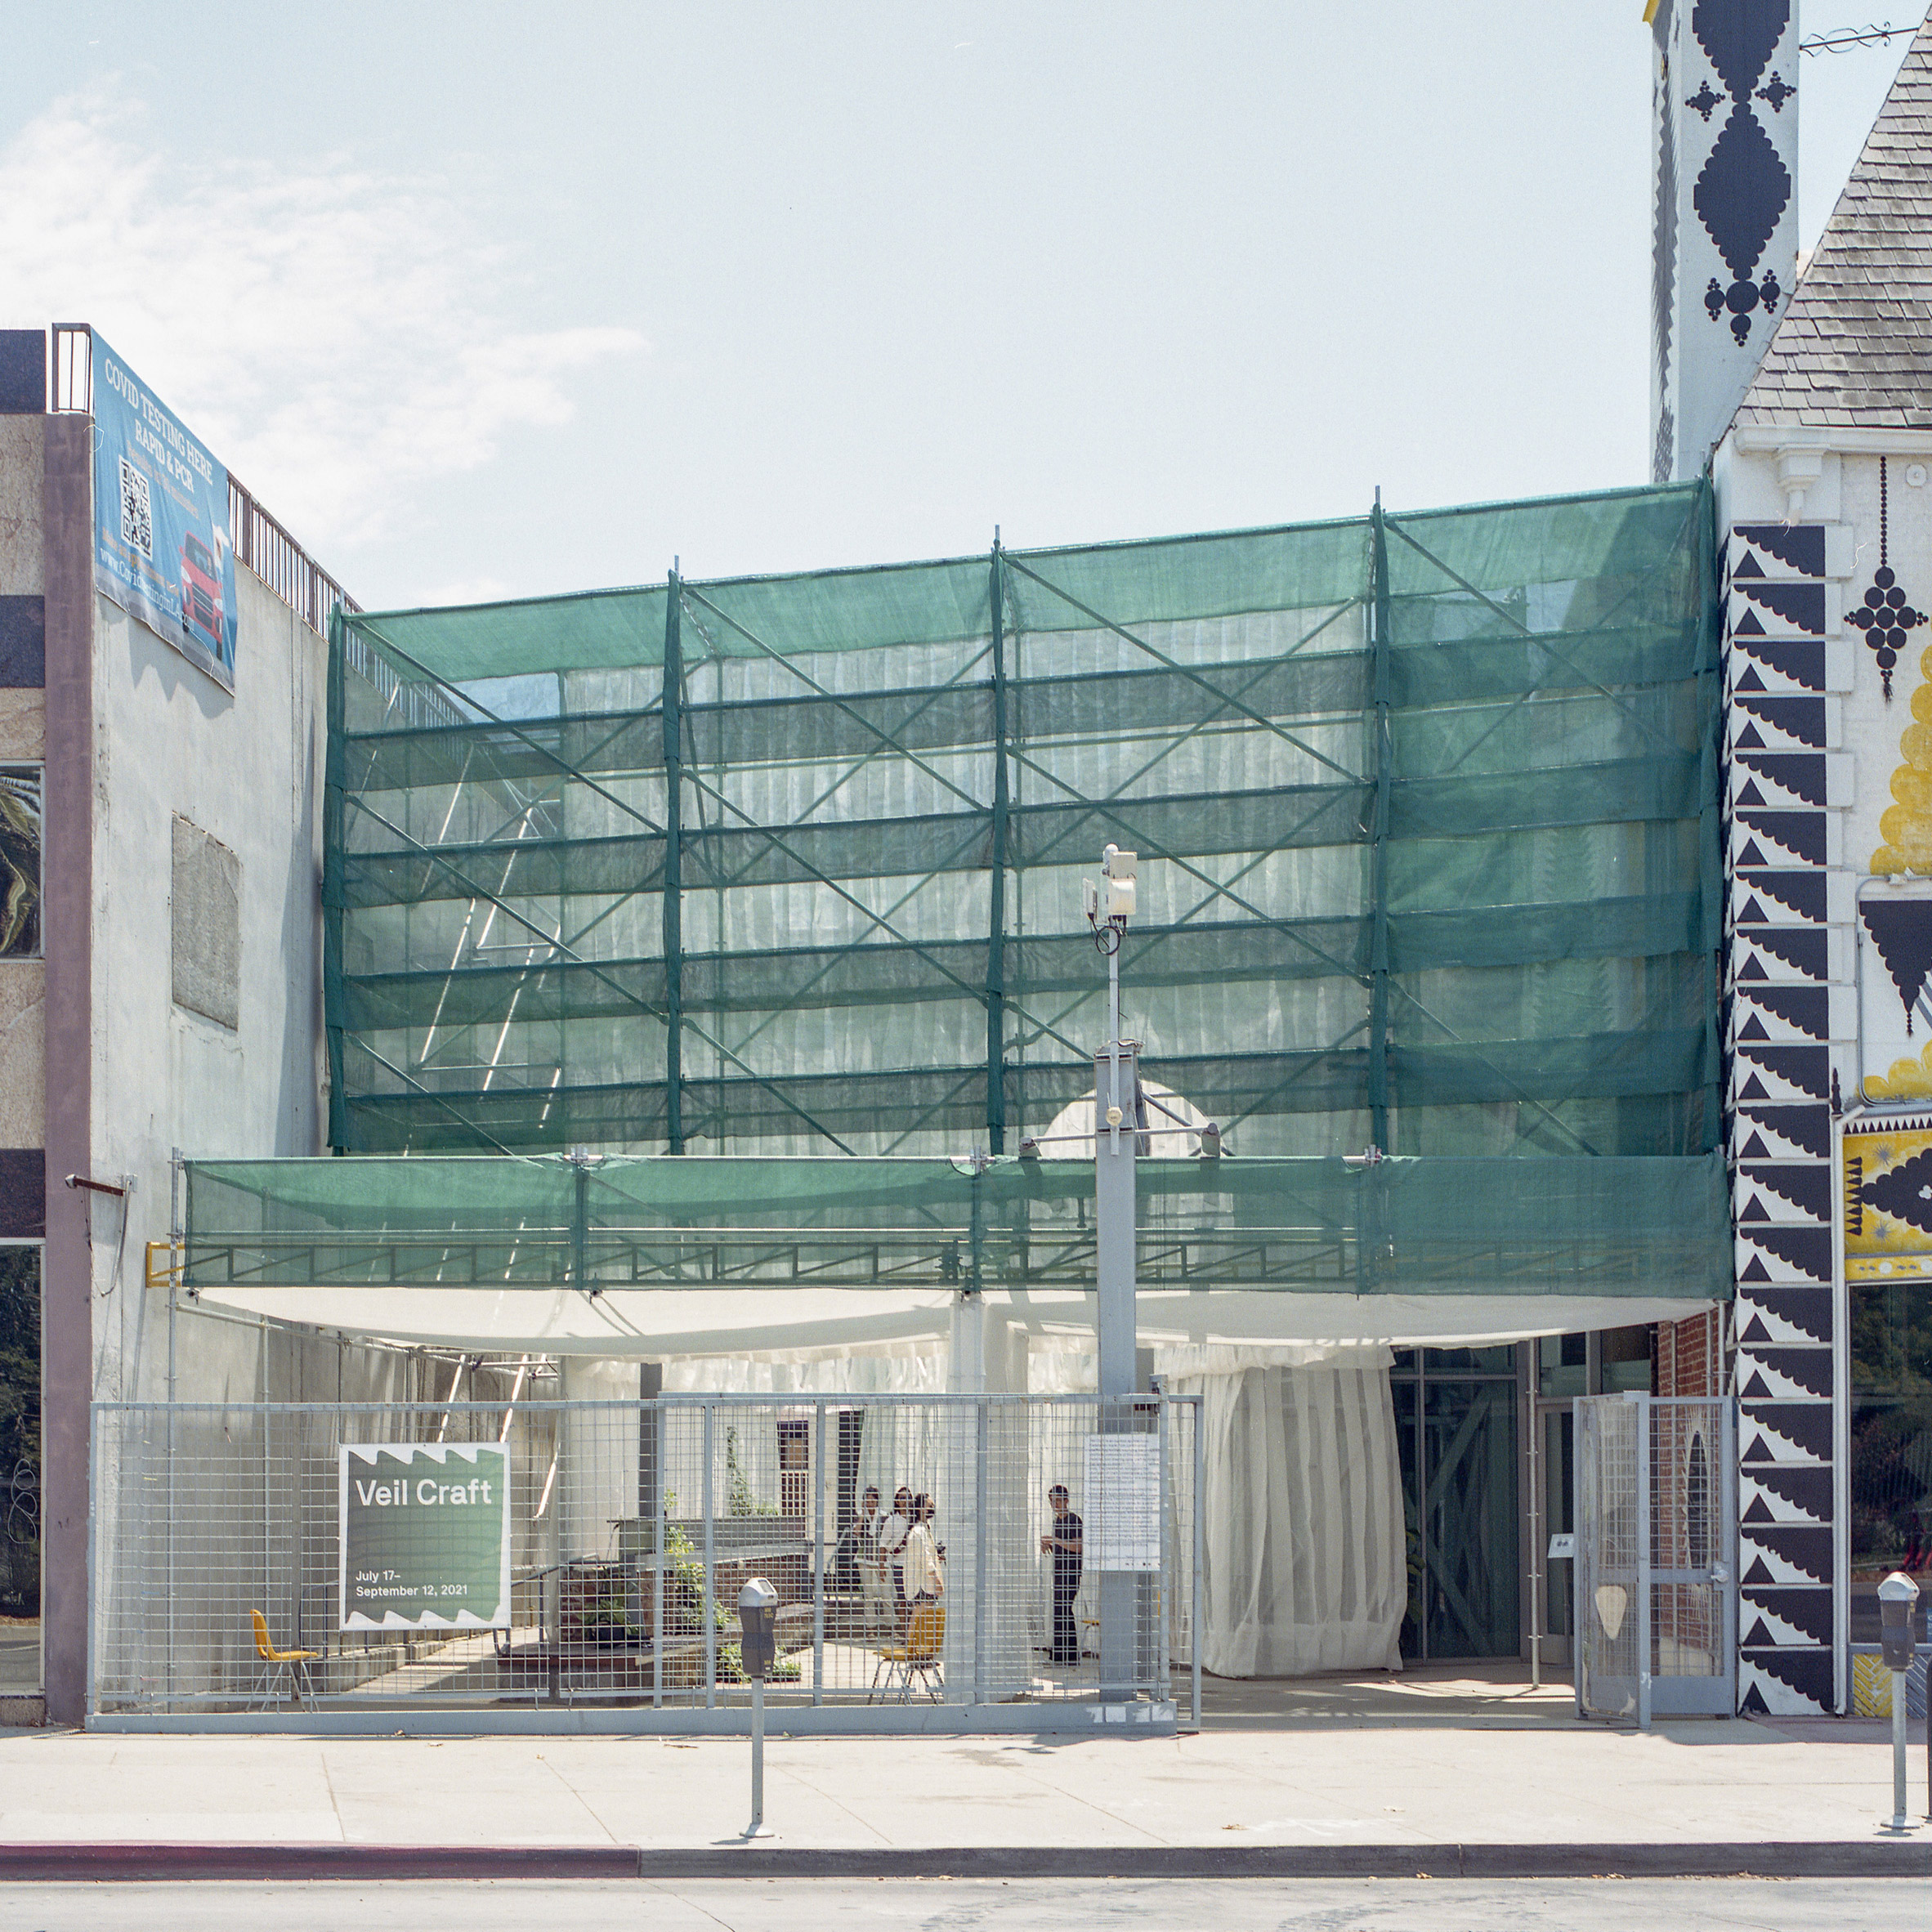 Wilshire Boulevard street view of Veil Craft by Figure at Craft Contemporary